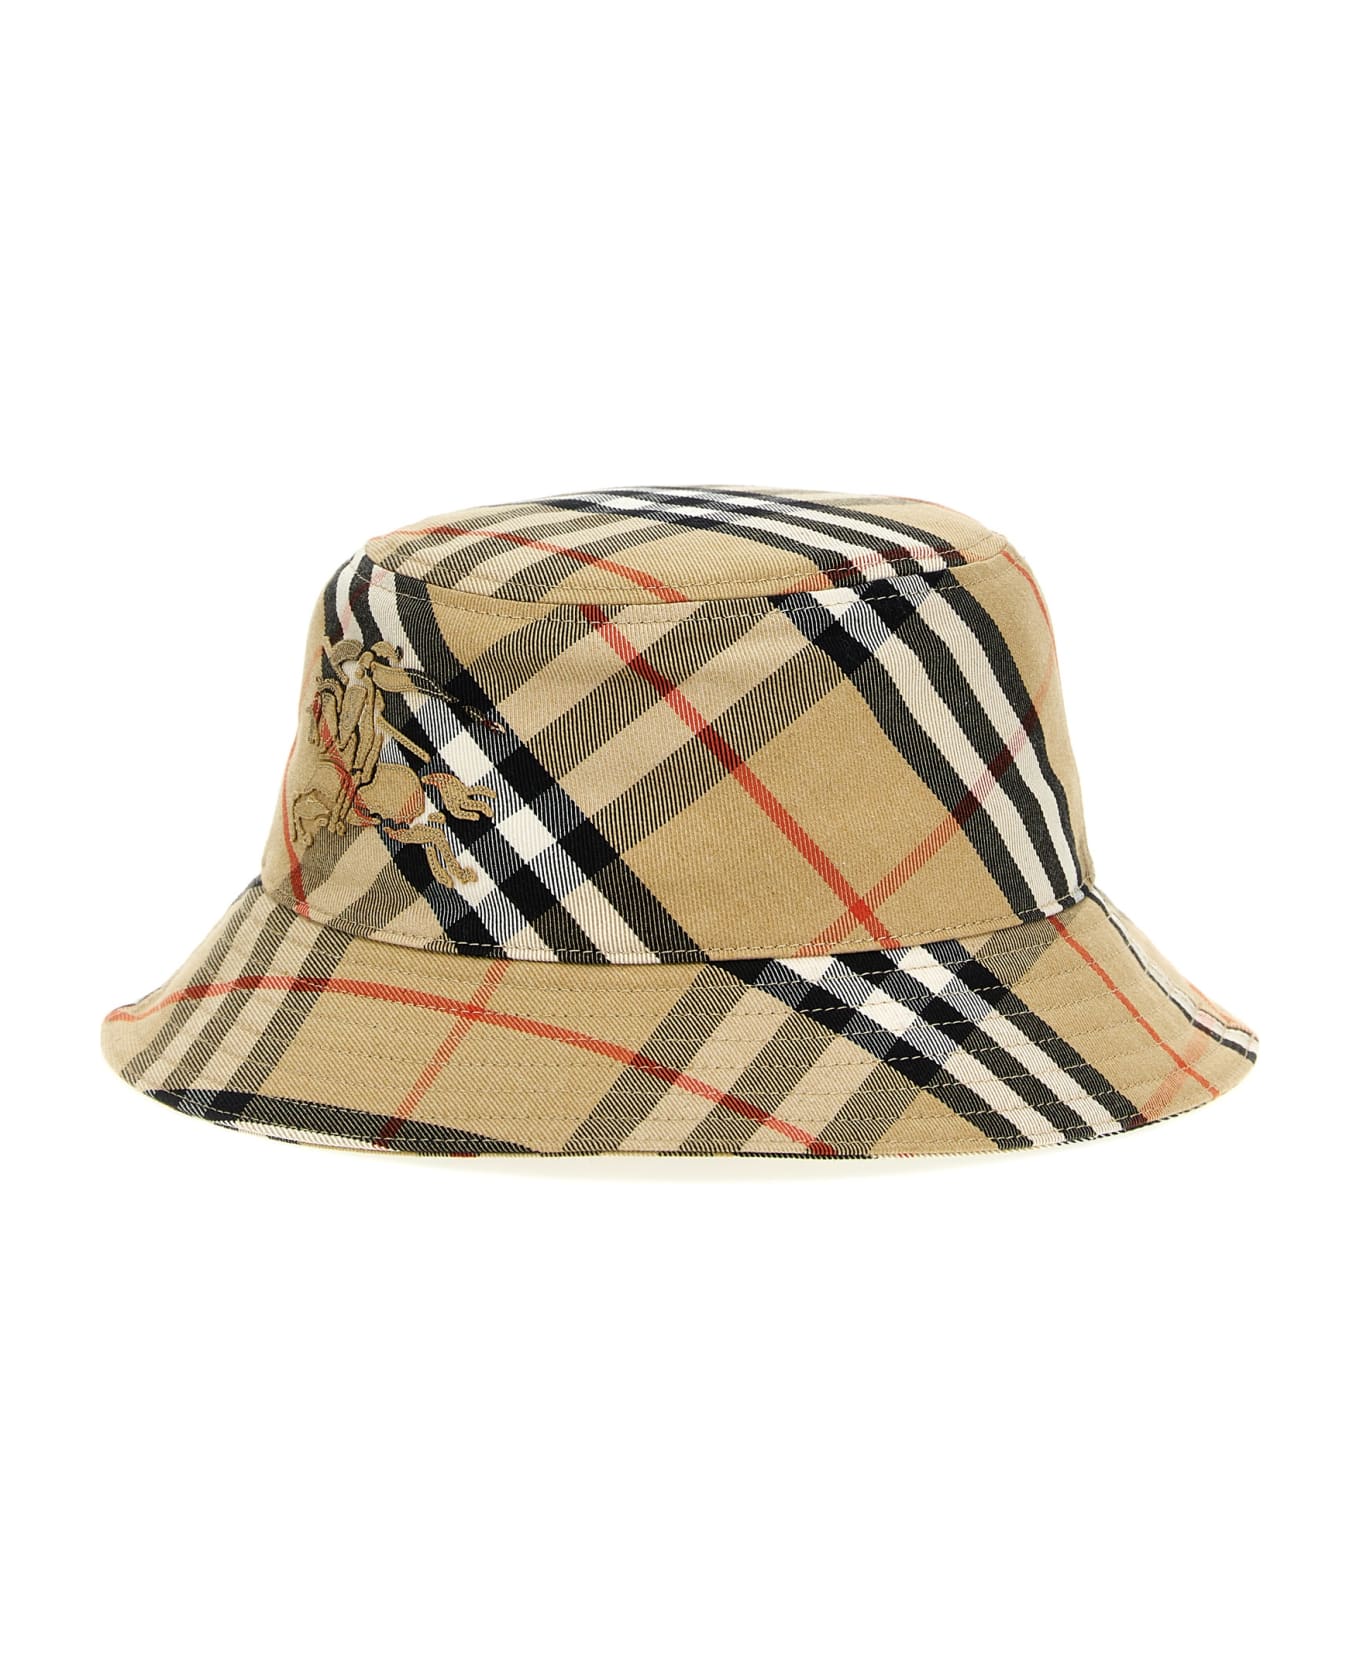 Burberry Logo Embroidery Check Bucket Hat - Beige